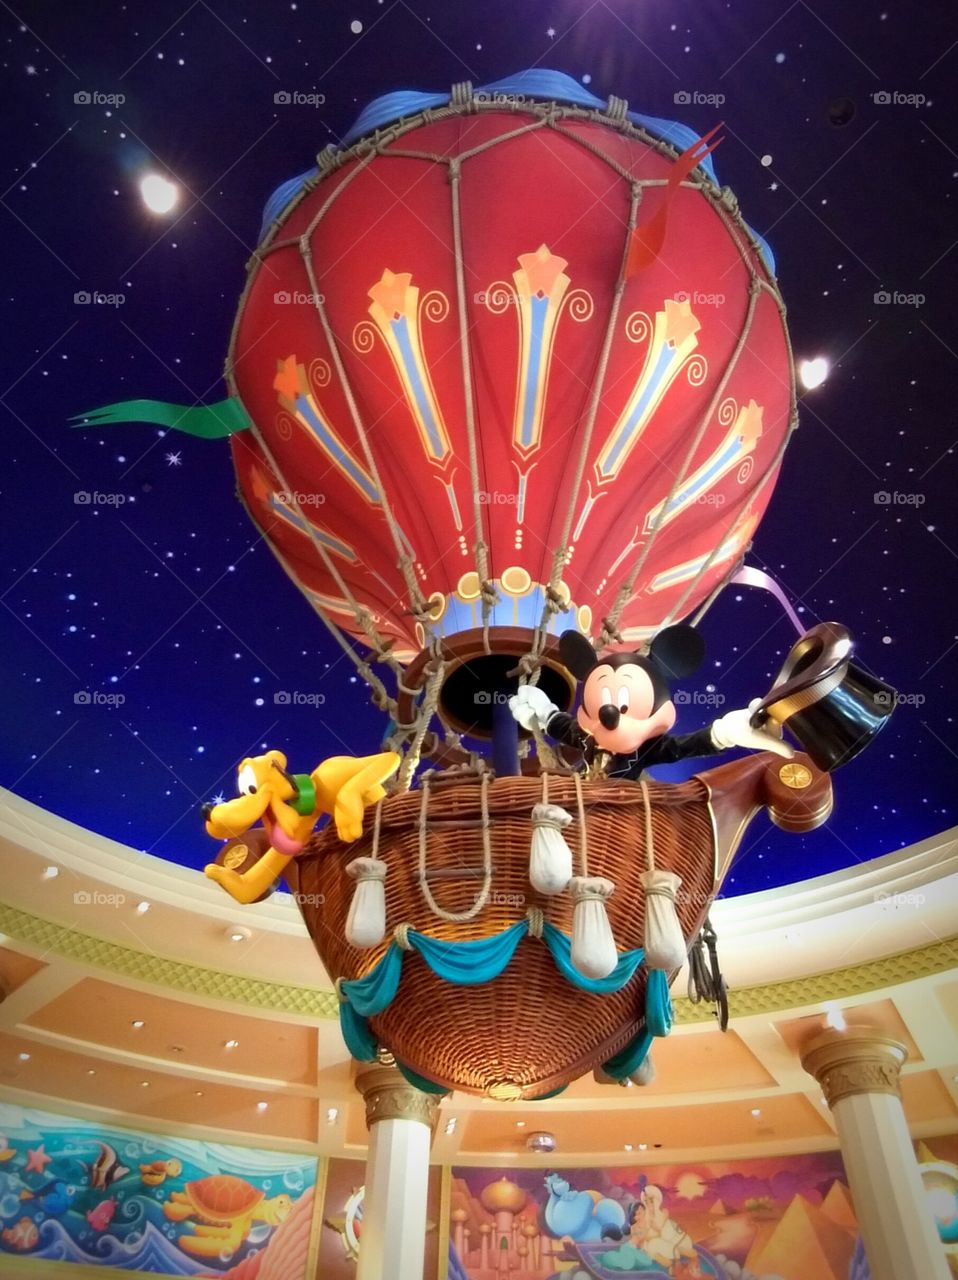 Micky Mouse with Pluto